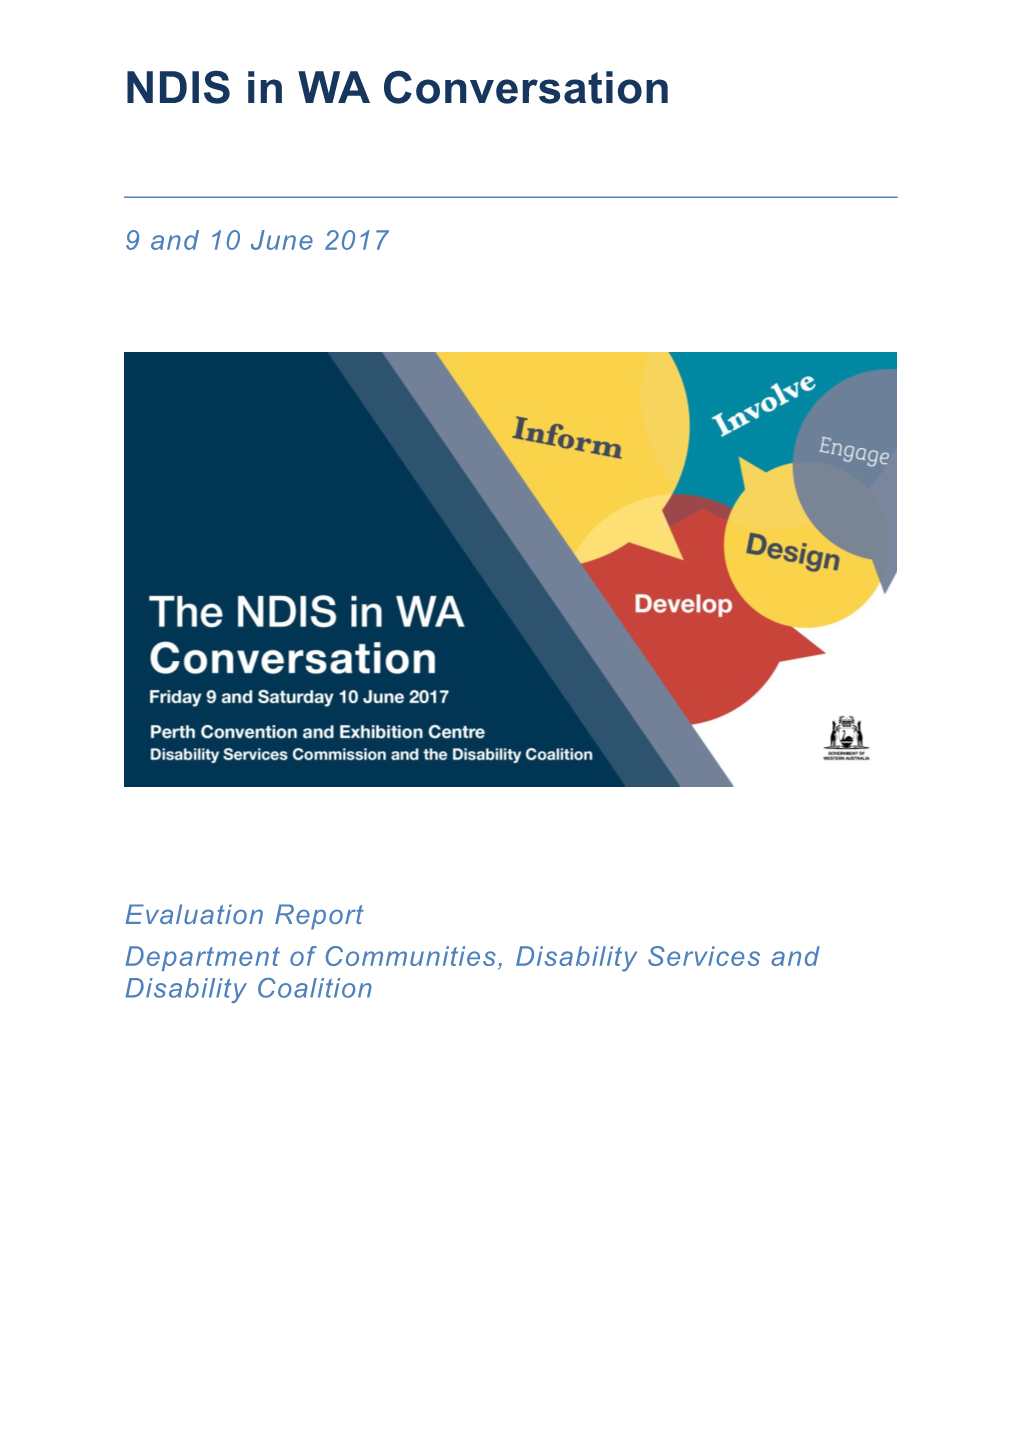 Department of Communities, Disability Services and Disability Coalition